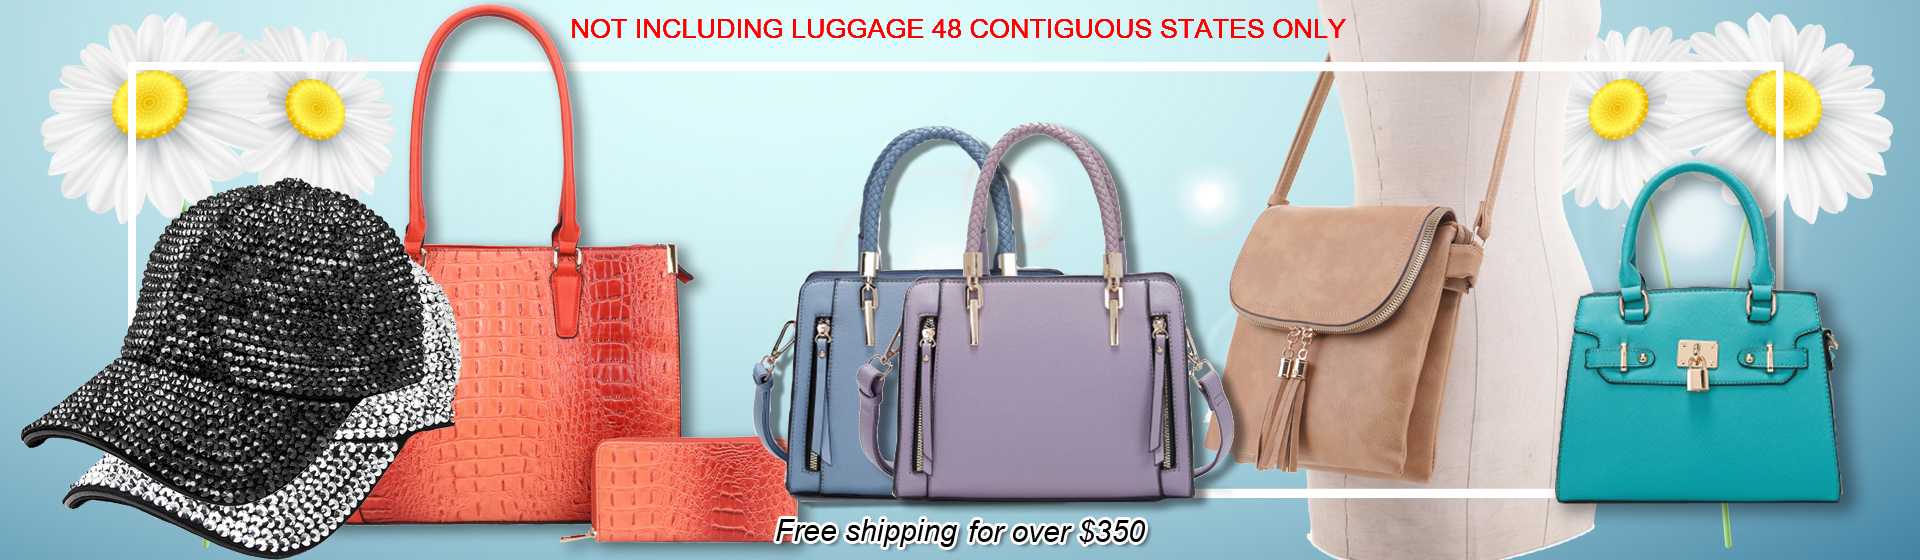 Wholesale Handbags and Jewelry | Western and Fashion Purses